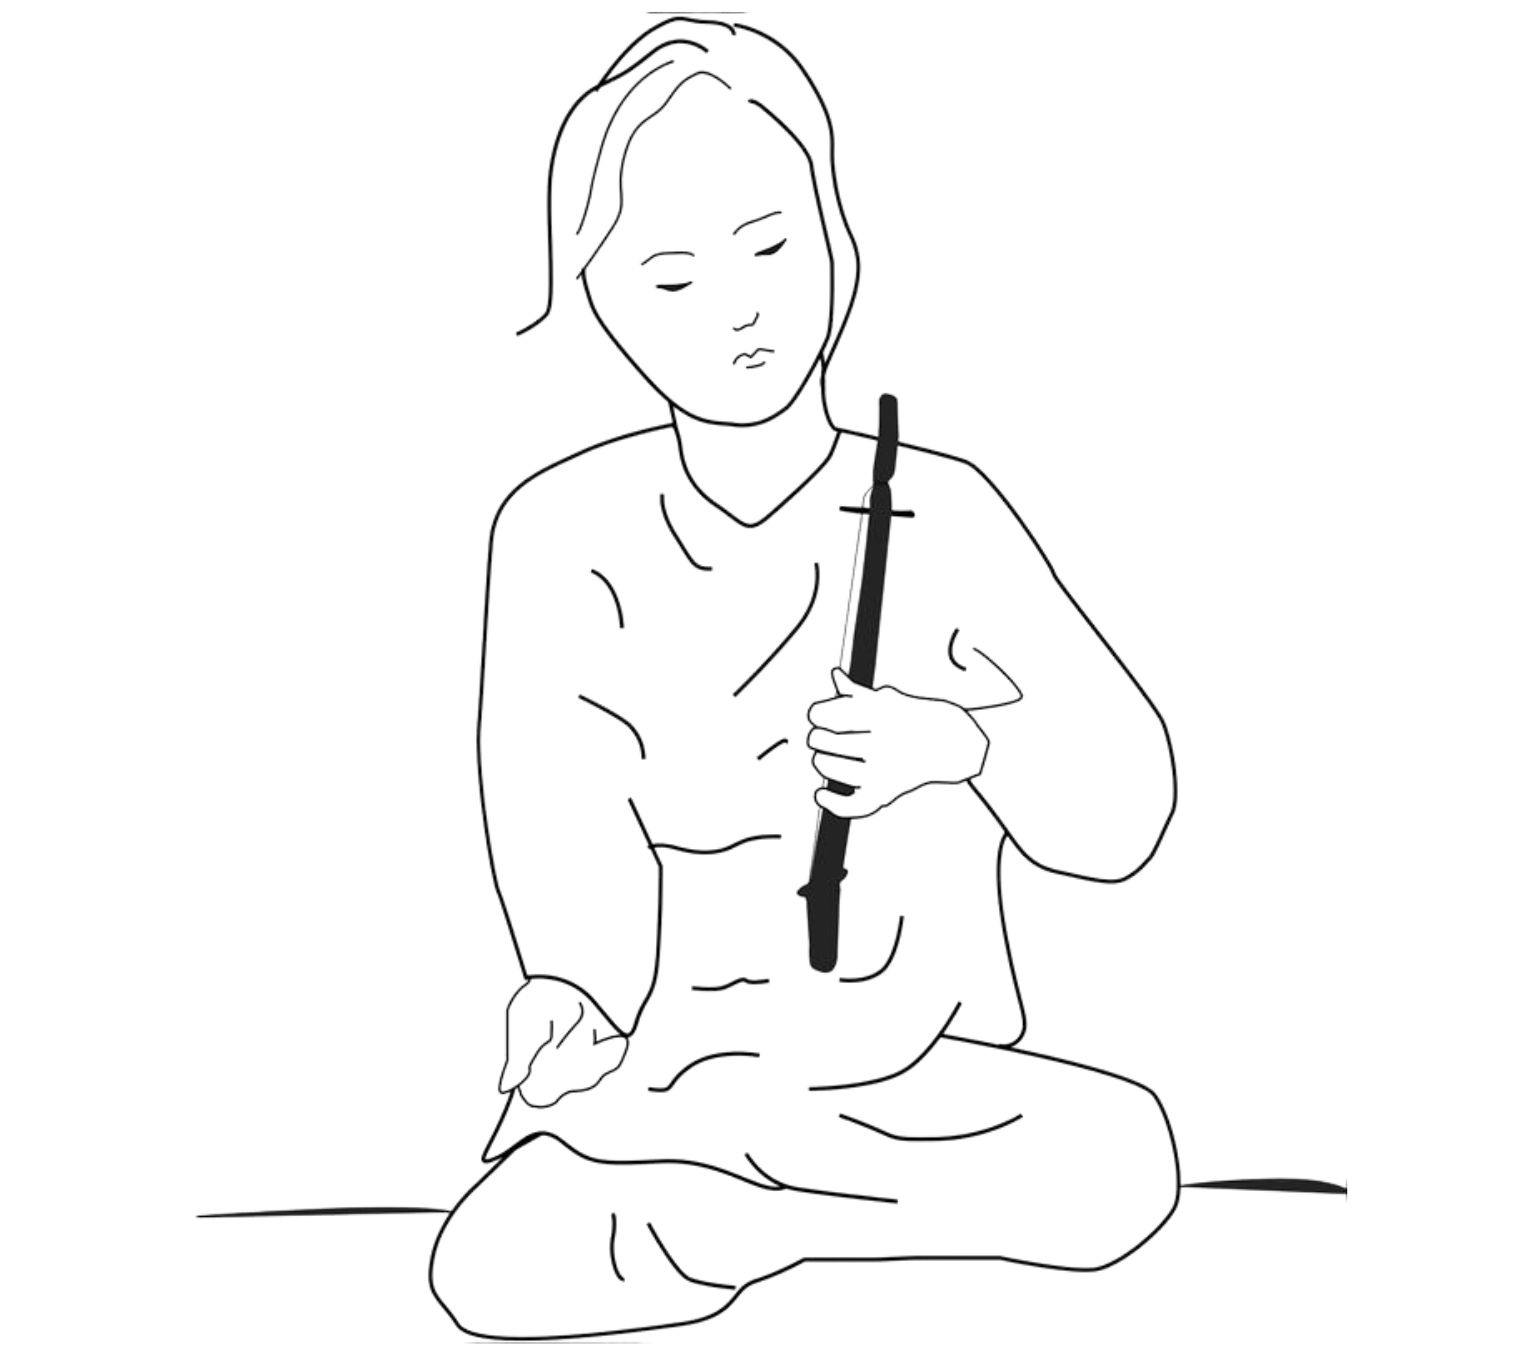 A drawing of a lady sitting cross legged on the floor holding a musical instrument.